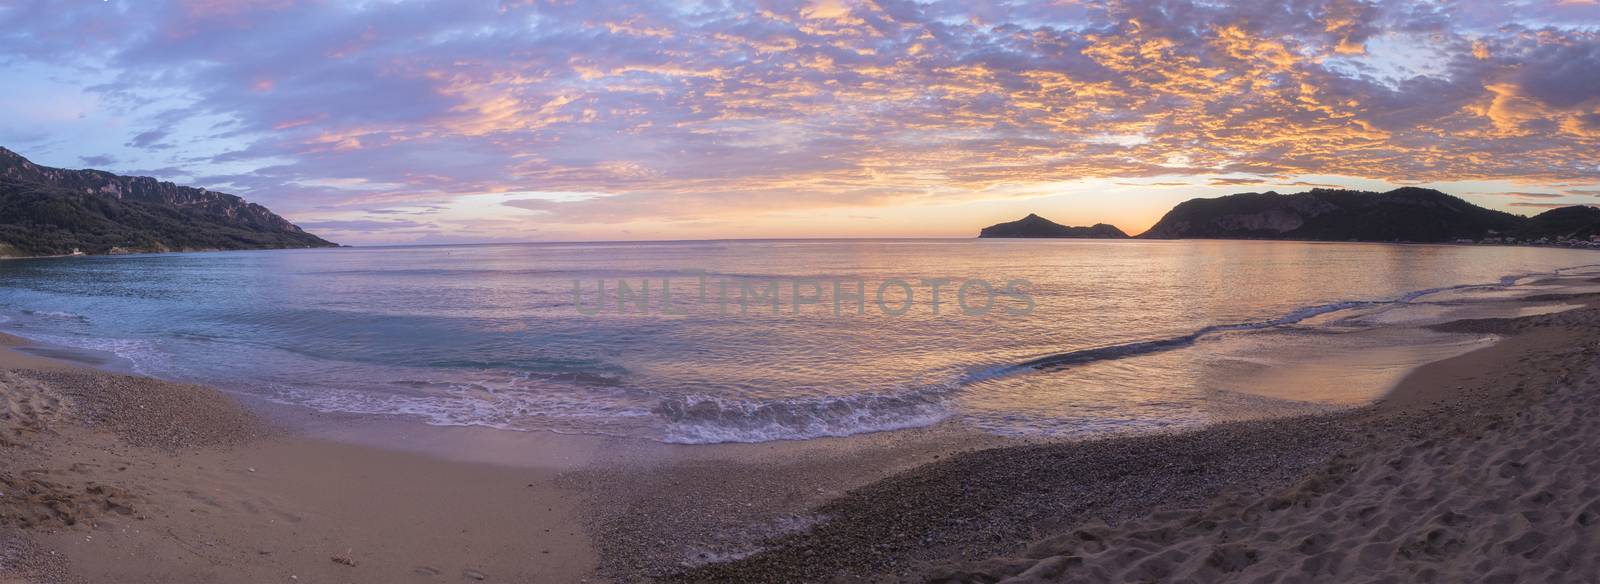 Panoramic view on beautiful pastel pink orange and golden sunset clouds and waves at sea shore Agios Georgios Pagon beach at Corfu island, Greece by Henkeova